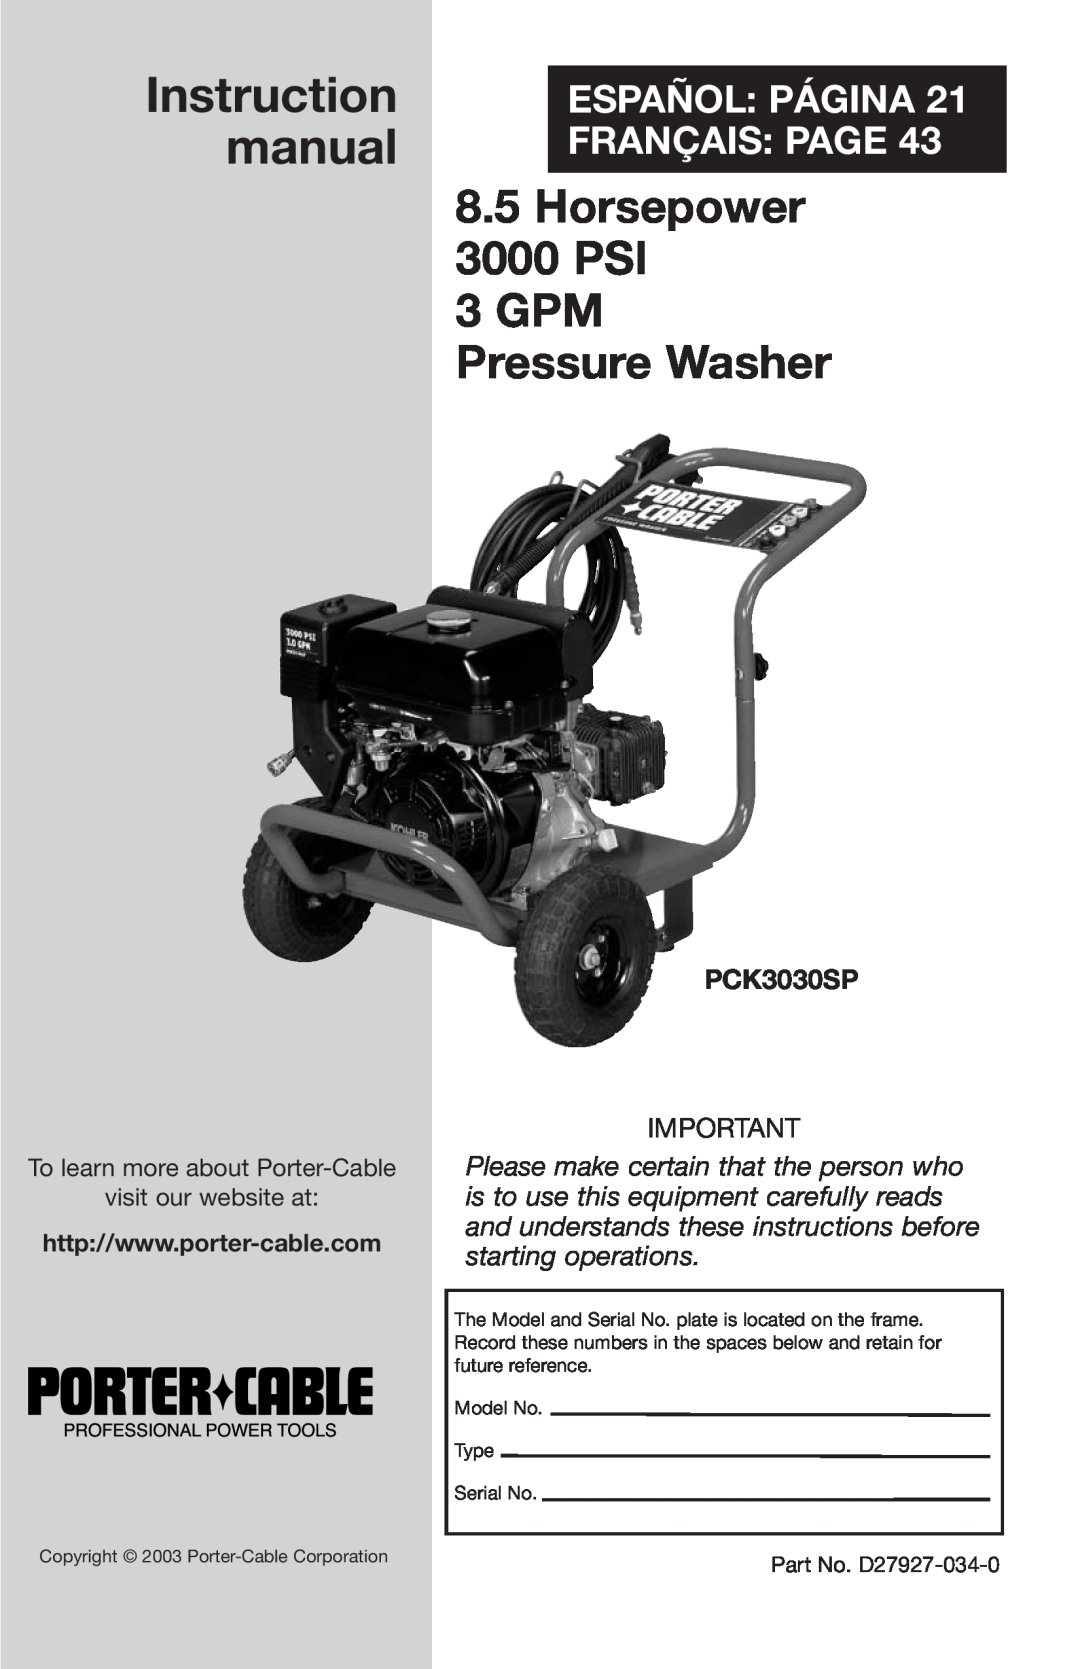 Porter-Cable D27927-034-0 instruction manual PCK3030SP, Instruction, Horsepower, 3000 PSI, 3 GPM, Pressure Washer 